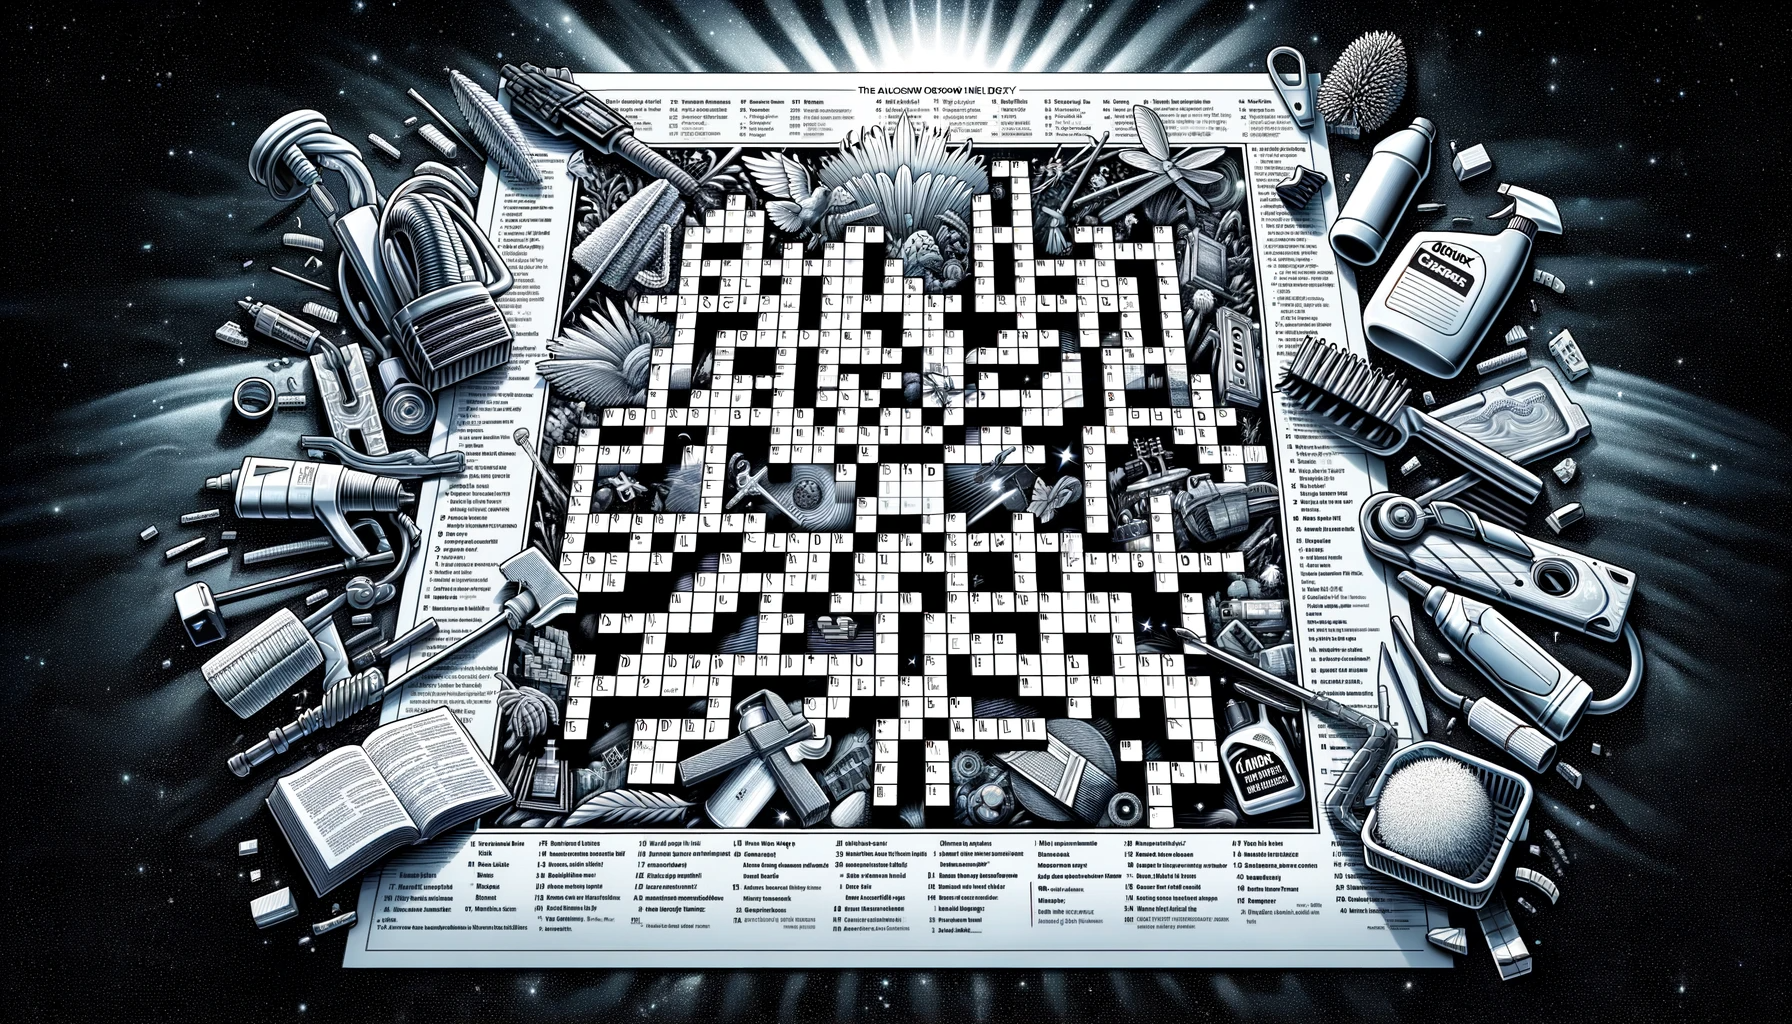 DALL·E 2023 12 07 16.26.10 An Artistic Representation Of The Alconox Inc. National Crossword Puzzle Day Puzzle 2023. The Image Features A Crossword Puzzle With A Variety Of Cl